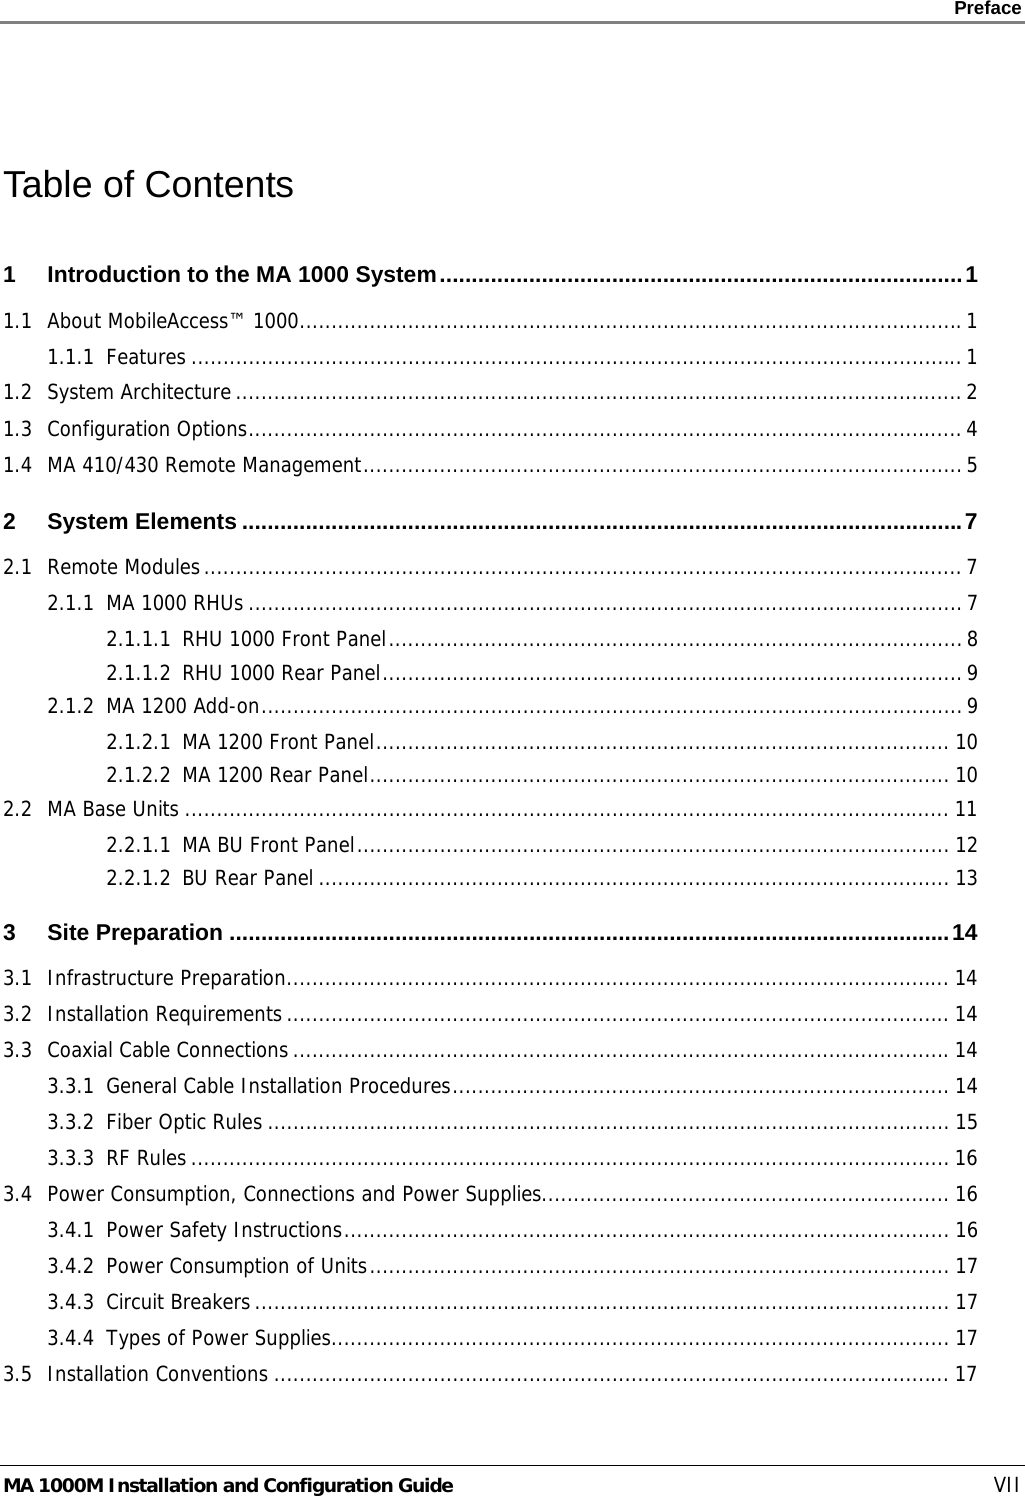    Preface      MA 1000M Installation and Configuration Guide    VII  Table of Contents 1 Introduction to the MA 1000 System..................................................................................1 1.1 About MobileAccess™ 1000........................................................................................................1 1.1.1 Features .........................................................................................................................1 1.2 System Architecture..................................................................................................................2 1.3 Configuration Options................................................................................................................4 1.4 MA 410/430 Remote Management.............................................................................................. 5 2 System Elements .................................................................................................................7 2.1 Remote Modules.......................................................................................................................7 2.1.1 MA 1000 RHUs ................................................................................................................7 2.1.1.1 RHU 1000 Front Panel..........................................................................................8 2.1.1.2 RHU 1000 Rear Panel...........................................................................................9 2.1.2 MA 1200 Add-on.............................................................................................................. 9 2.1.2.1 MA 1200 Front Panel.......................................................................................... 10 2.1.2.2 MA 1200 Rear Panel........................................................................................... 10 2.2 MA Base Units ........................................................................................................................ 11 2.2.1.1 MA BU Front Panel............................................................................................. 12 2.2.1.2 BU Rear Panel ................................................................................................... 13 3 Site Preparation .................................................................................................................14 3.1 Infrastructure Preparation........................................................................................................ 14 3.2 Installation Requirements........................................................................................................ 14 3.3 Coaxial Cable Connections .......................................................................................................14 3.3.1 General Cable Installation Procedures.............................................................................. 14 3.3.2 Fiber Optic Rules ........................................................................................................... 15 3.3.3 RF Rules ....................................................................................................................... 16 3.4 Power Consumption, Connections and Power Supplies................................................................ 16 3.4.1 Power Safety Instructions............................................................................................... 16 3.4.2 Power Consumption of Units........................................................................................... 17 3.4.3 Circuit Breakers............................................................................................................. 17 3.4.4 Types of Power Supplies................................................................................................. 17 3.5 Installation Conventions .......................................................................................................... 17 